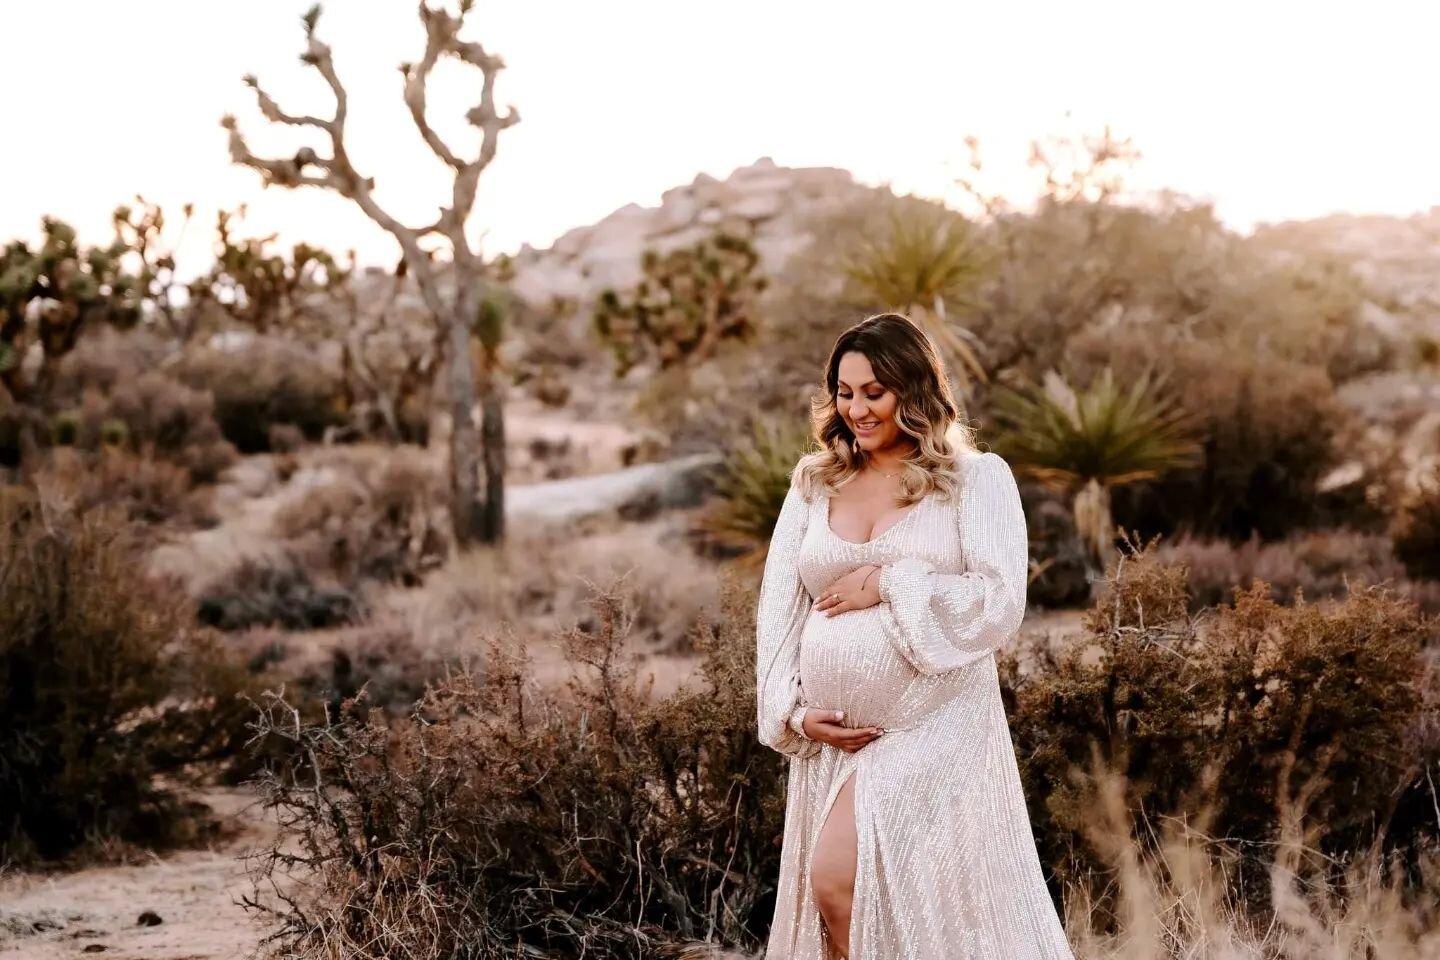 I have so much catching up to do with posting.. 
So here is an amazing maternity shoot out in Joshua Tree earlier this year. 

#nmphotographer #nmweddingphotographer #washingtonweddingphotographer #washingtonphotographer #pnwphotographer #travelphoto